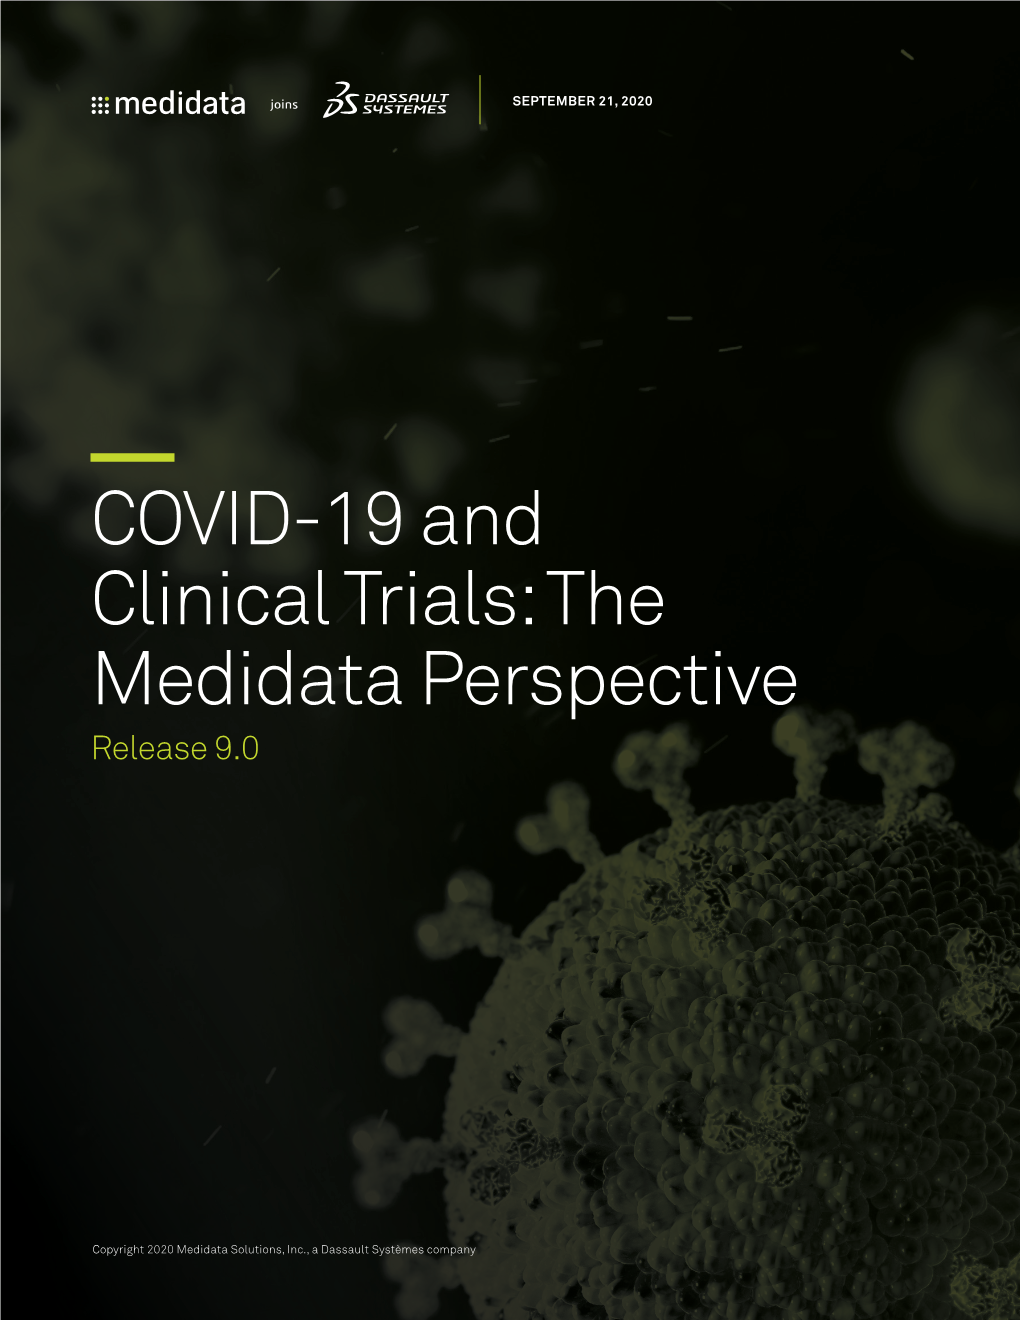 COVID-19 and Clinical Trials: the Medidata Perspective Release 9.0